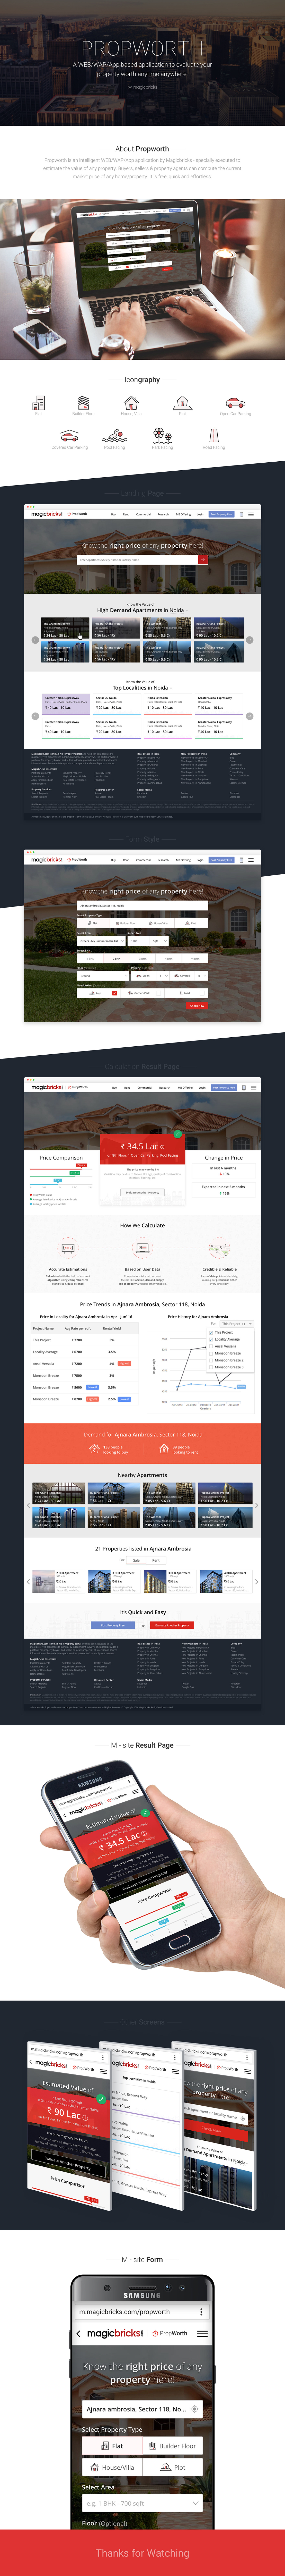 Propworth calculator evaluator landing page Website red theme creative forms icons mobile site real estate